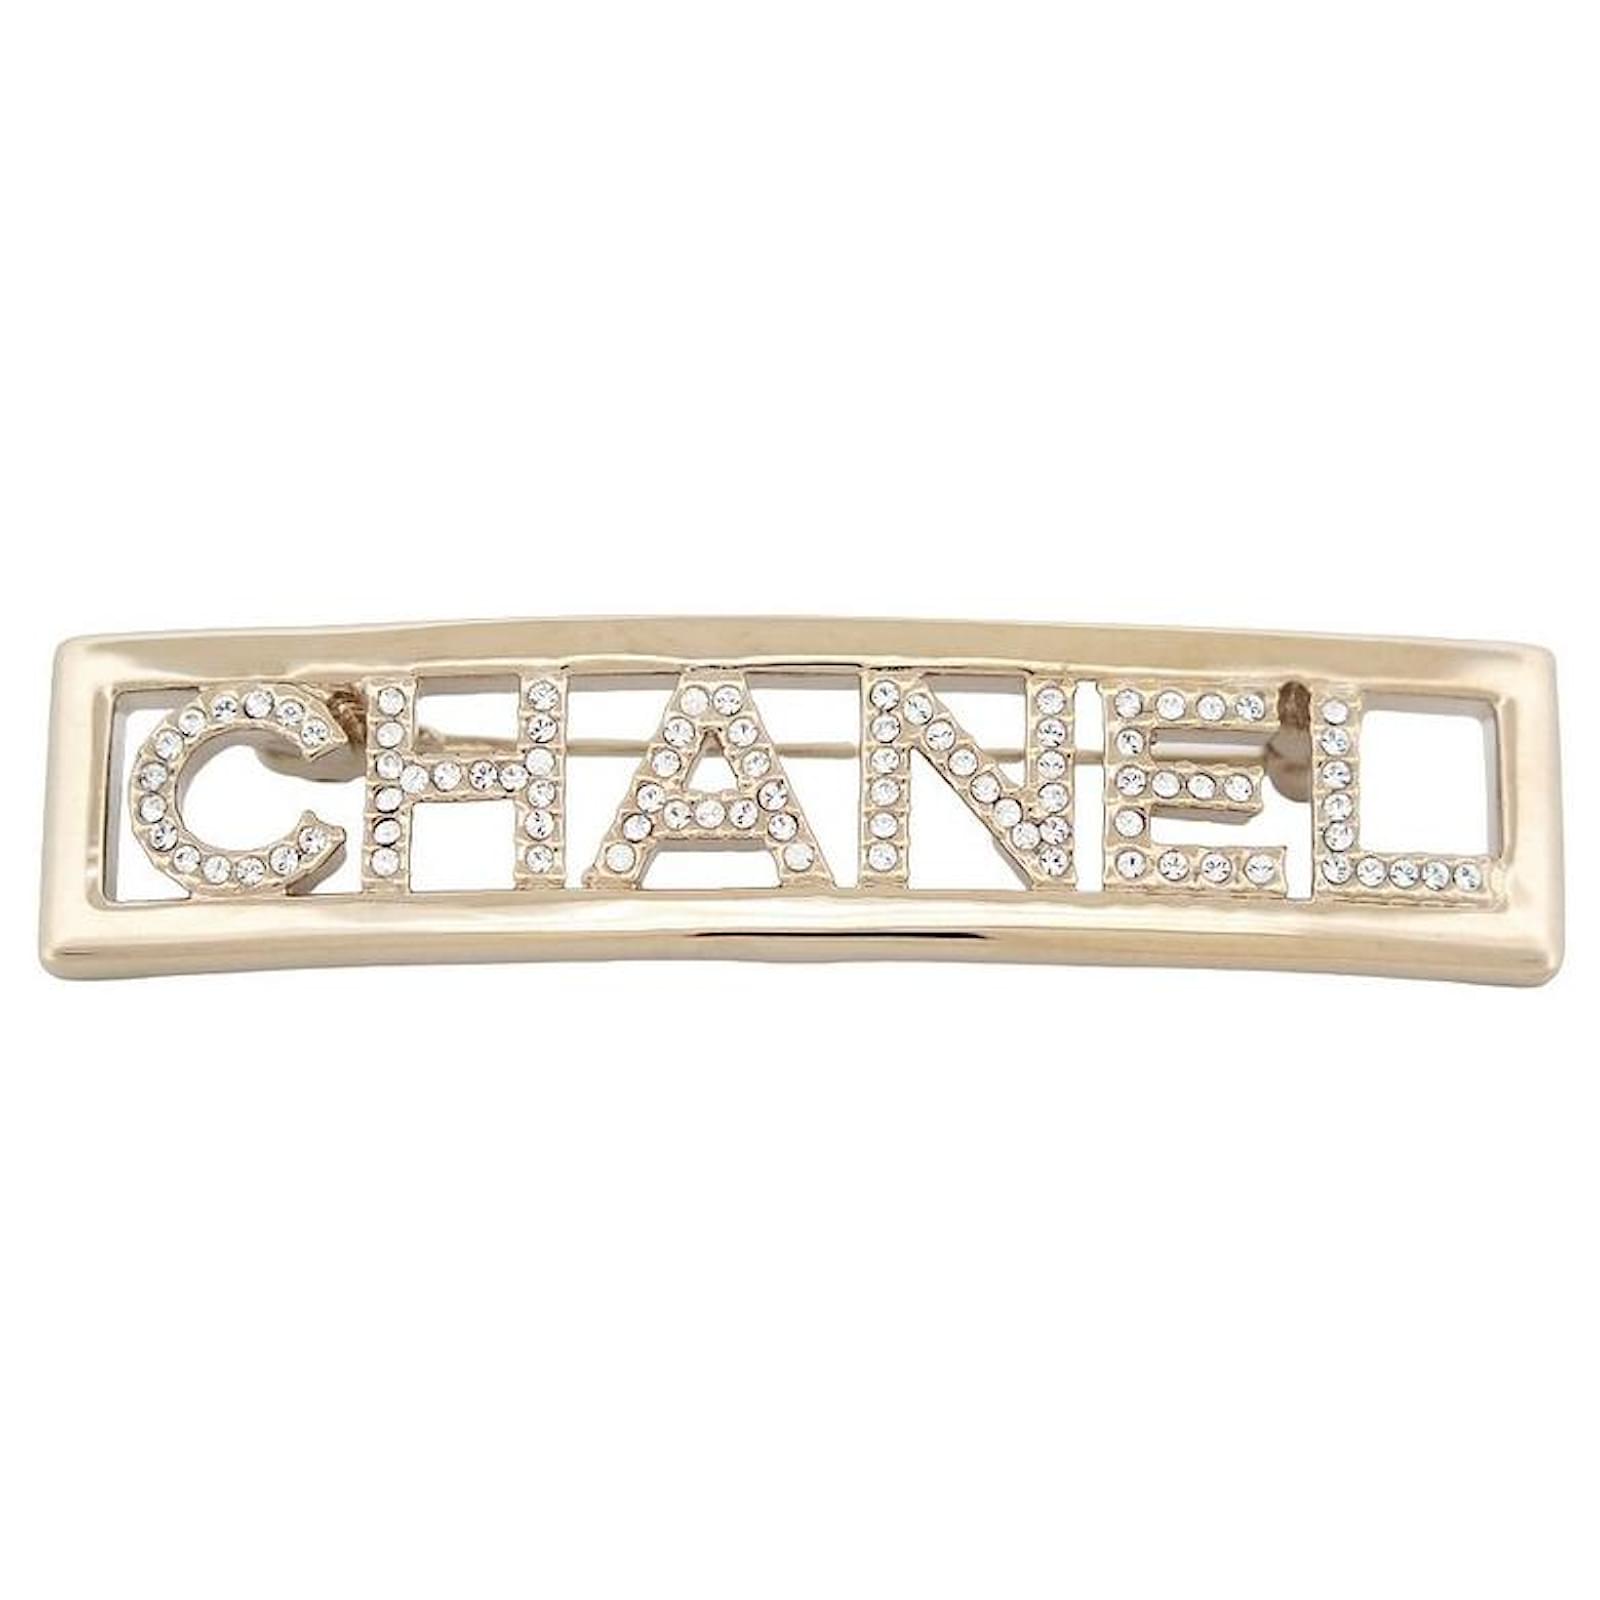 Chanel metal CC brooch with glass beads embellishment